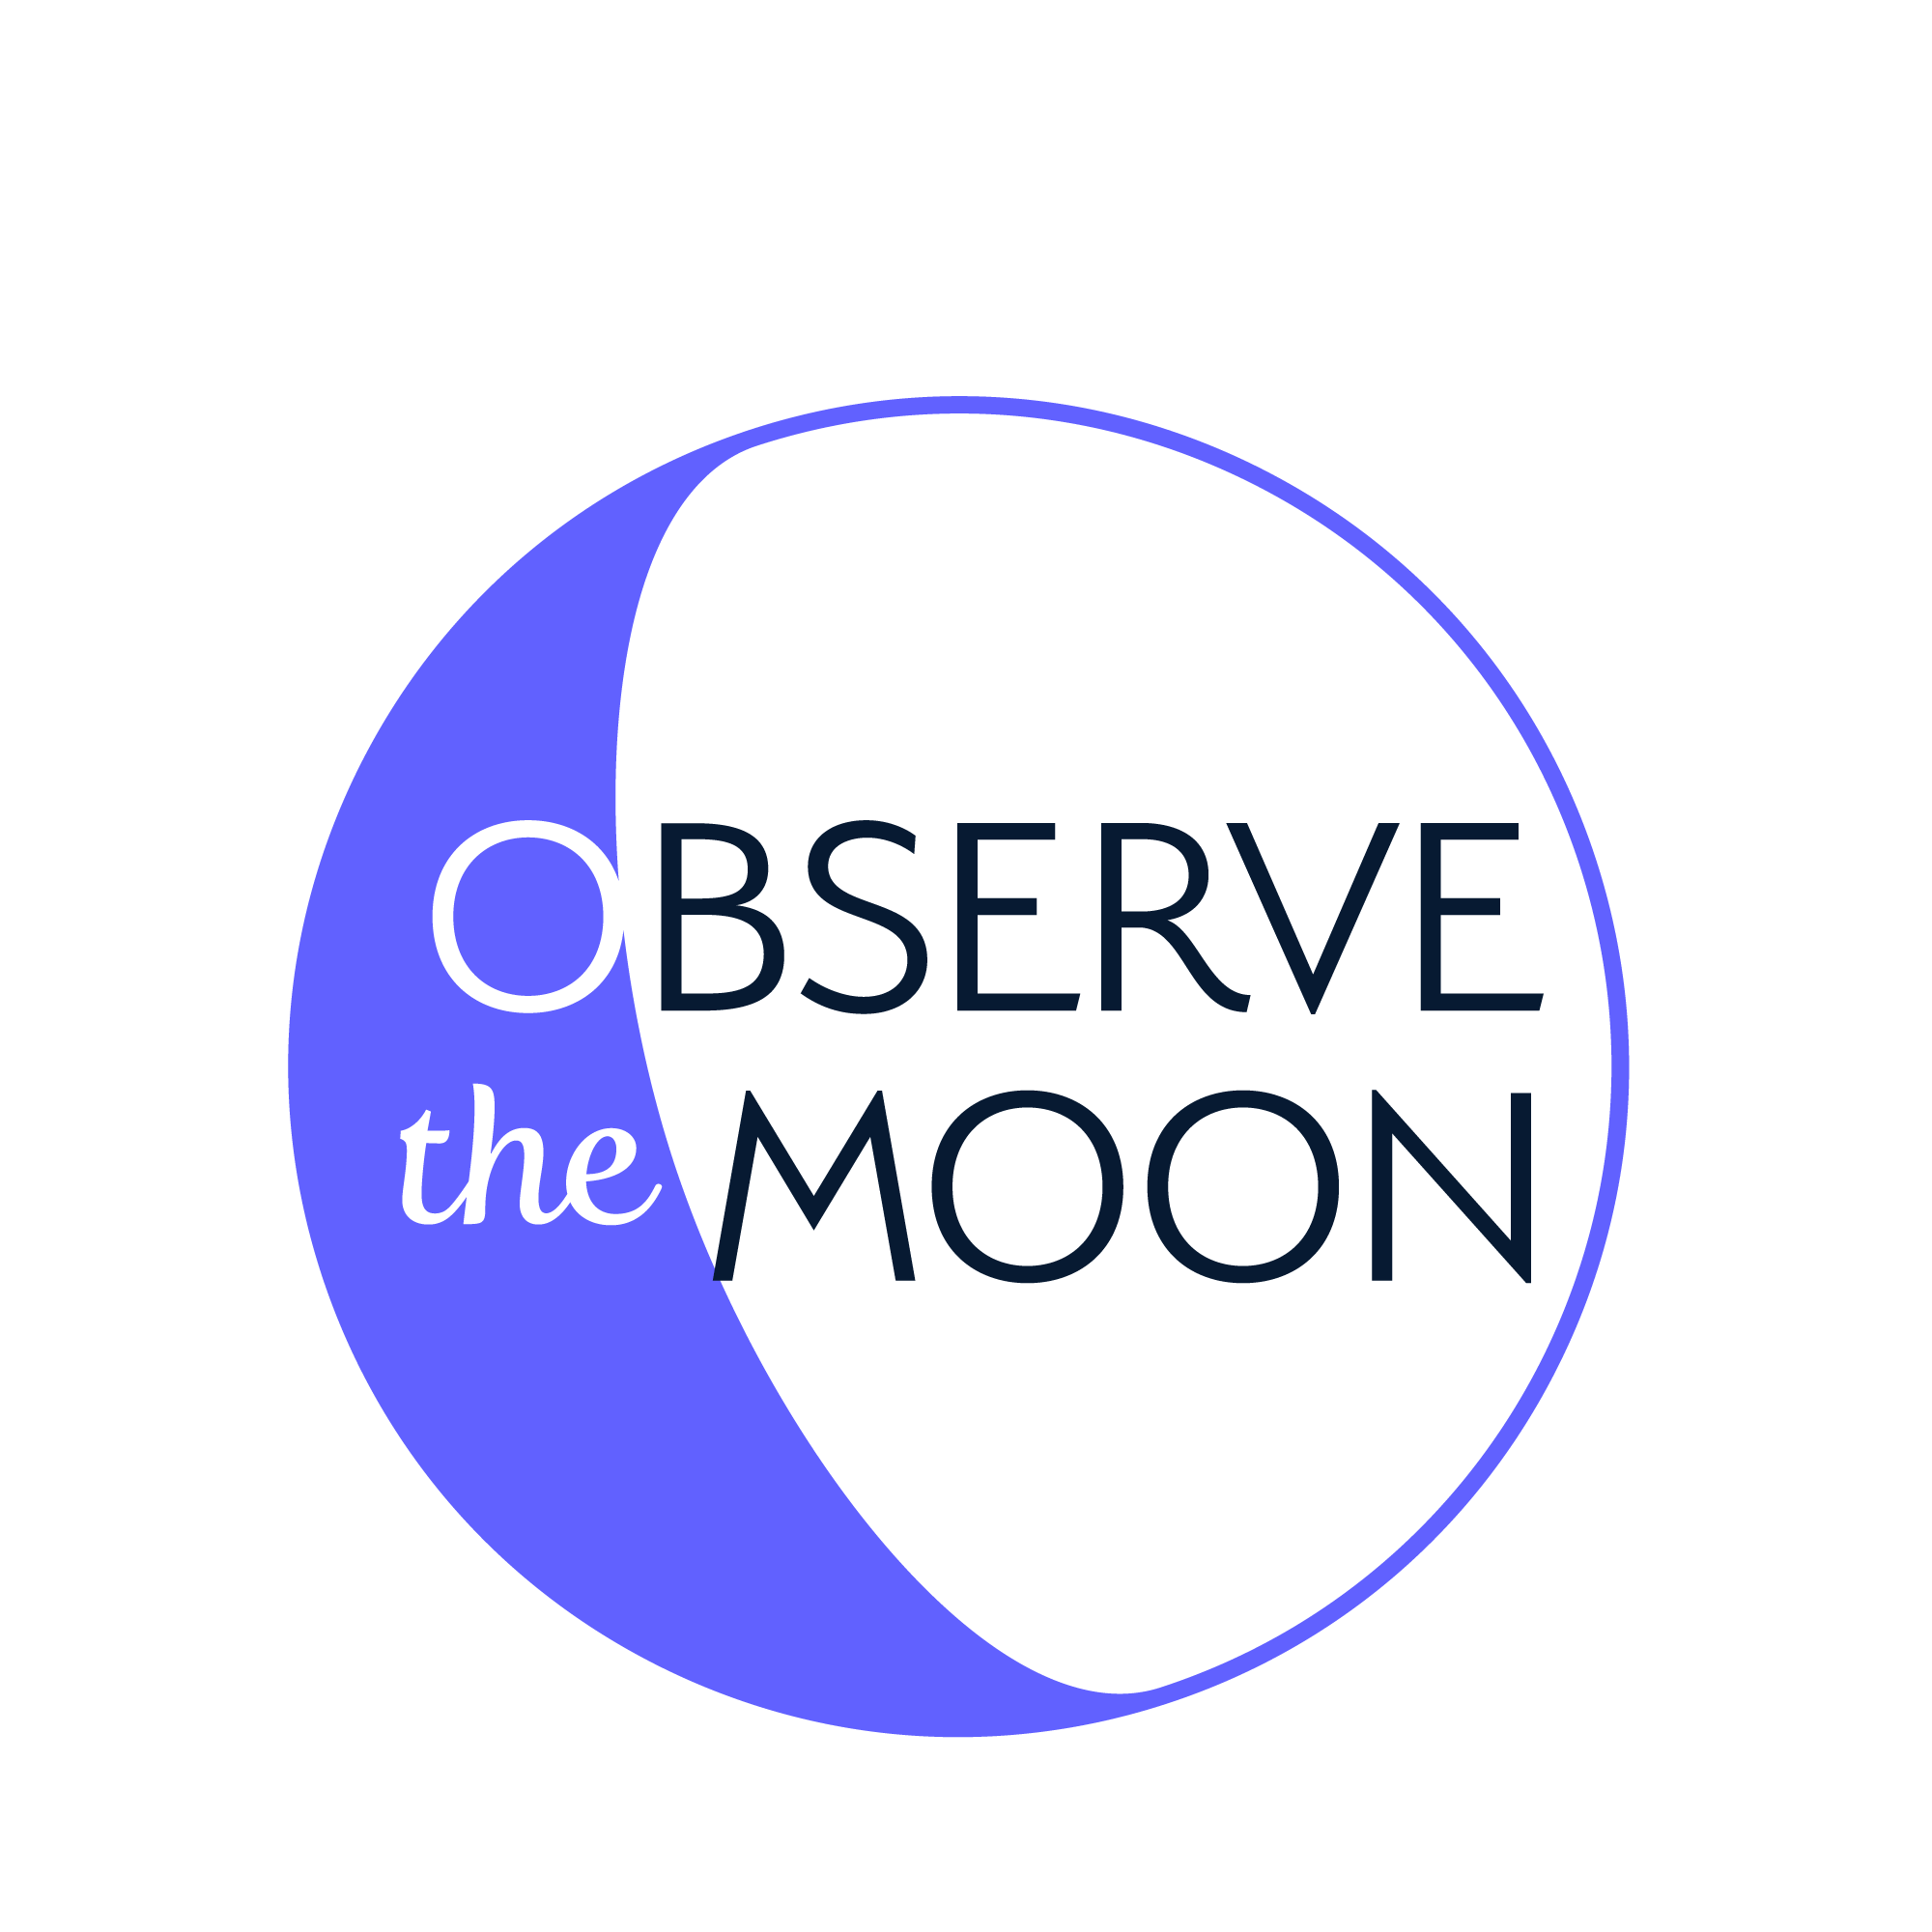 A simple two-color illustration of a gibbous Moon containing the words "Observe the Moon."